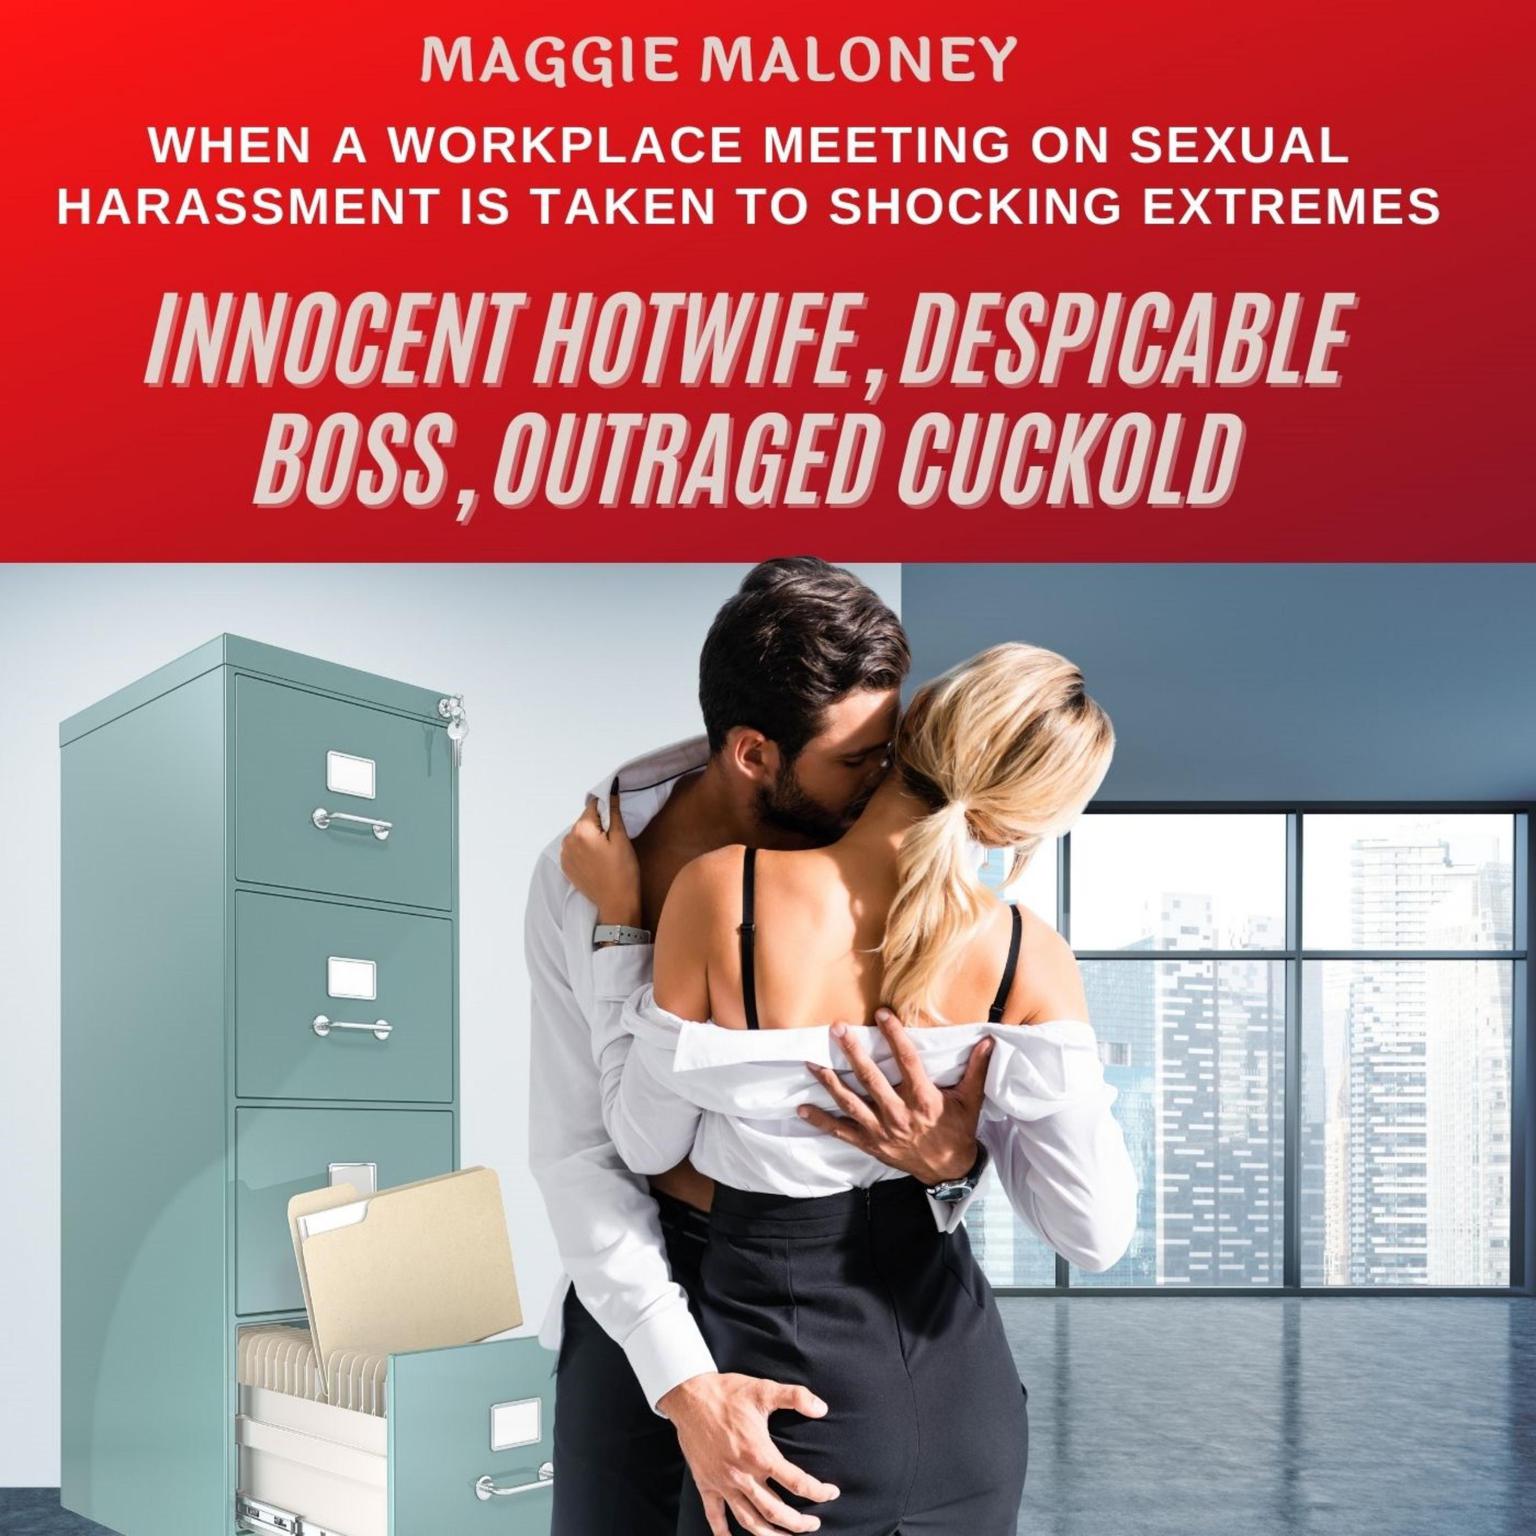 Innocent Hotwife, Despicable Boss, Outraged Cuckold: When a Workplace Meeting on Sexual Harassment is Taken to Shocking Extremes Audiobook, by Maggie Maloney